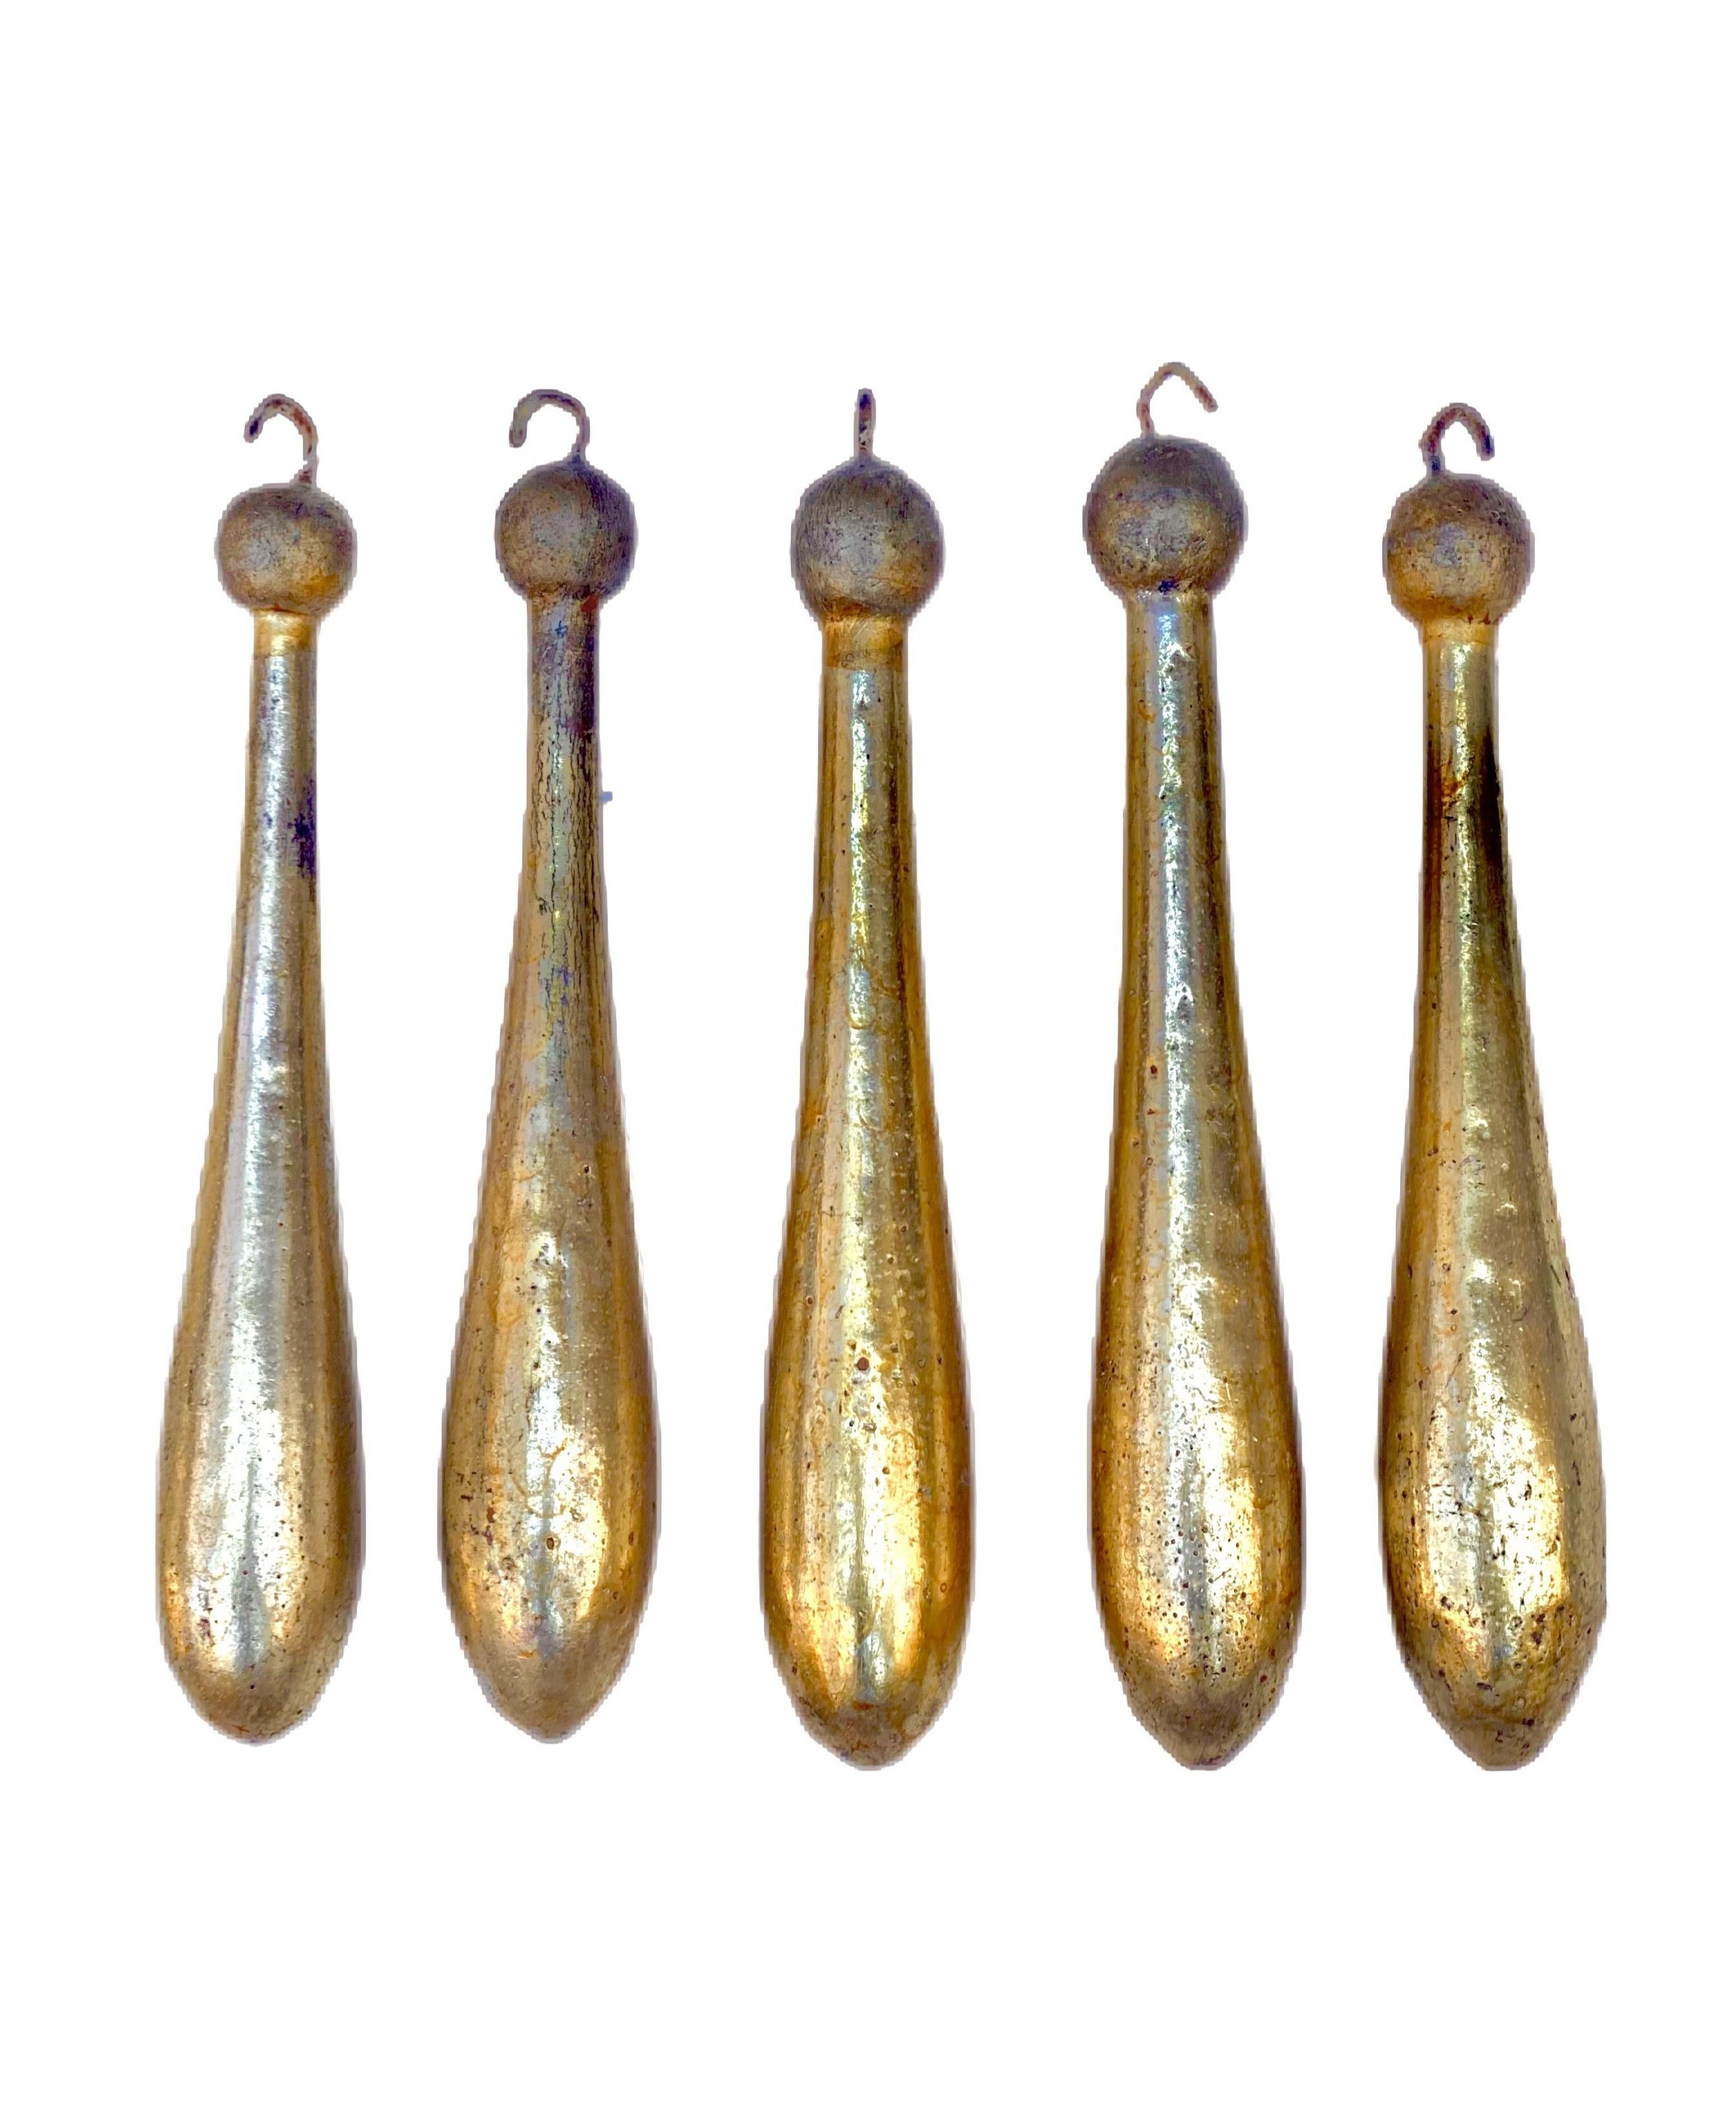 Hand-Carved 18th Century Italian Gold Leaf Rococo Tassel Ornaments (7 sets of 5)